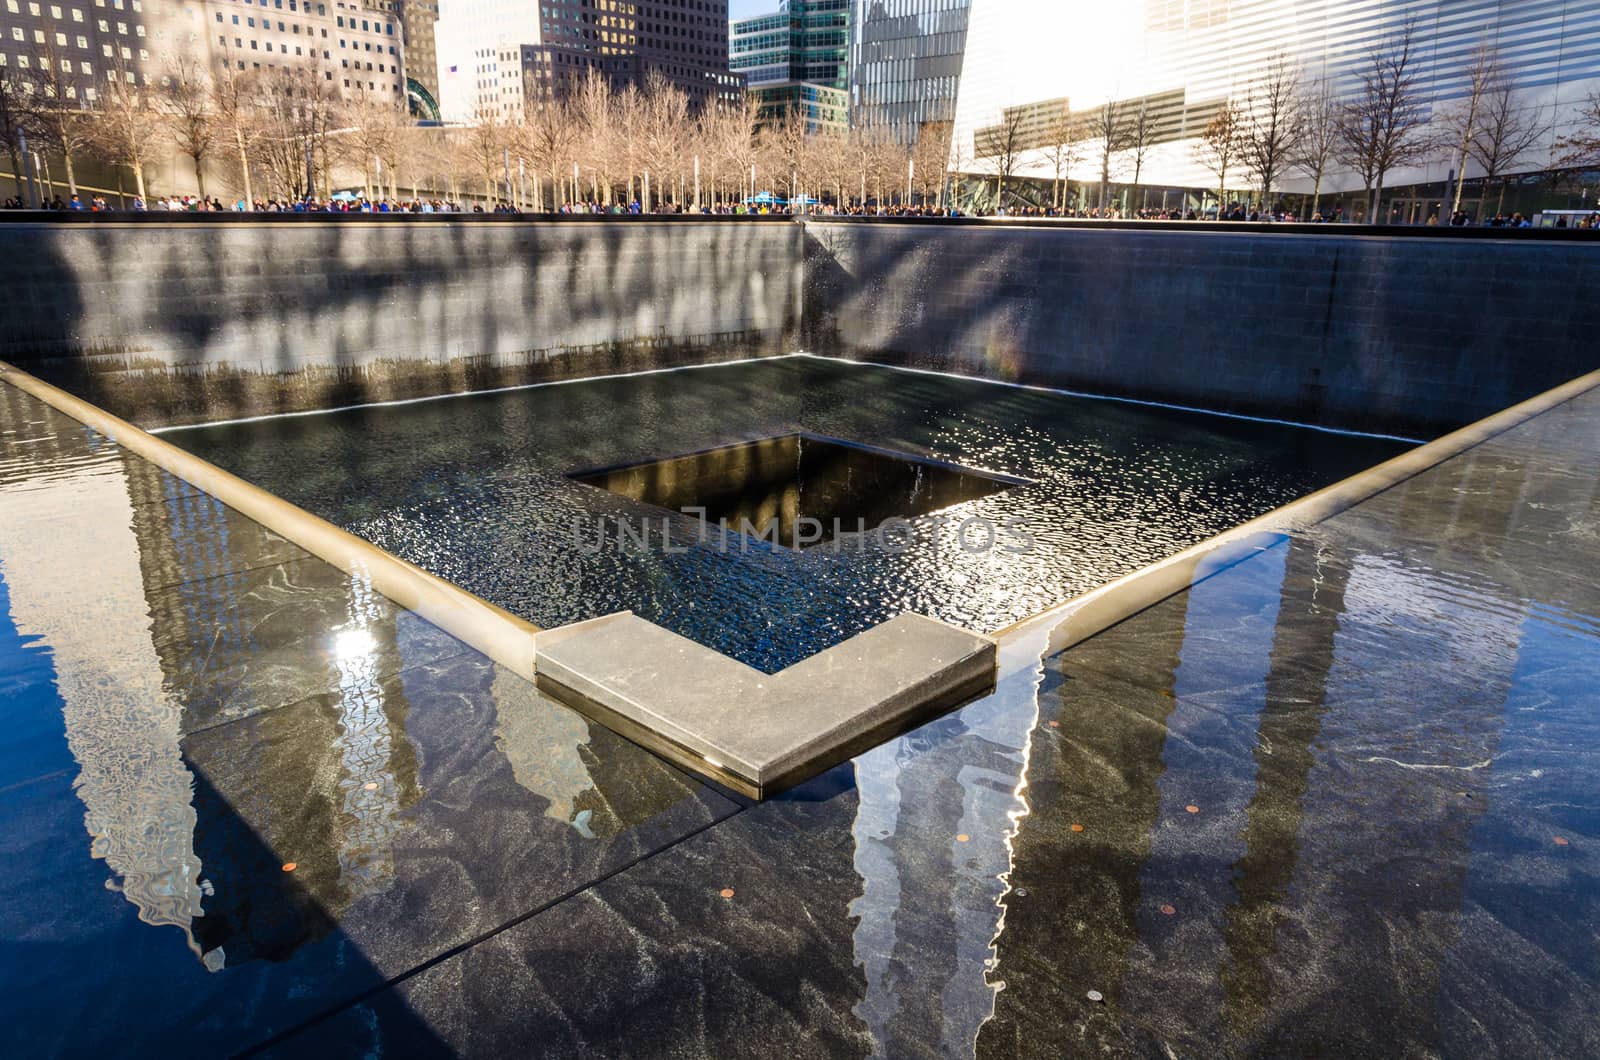 9 11 Memorial and the new World trade centre in Manhattan, New York by mauricallari